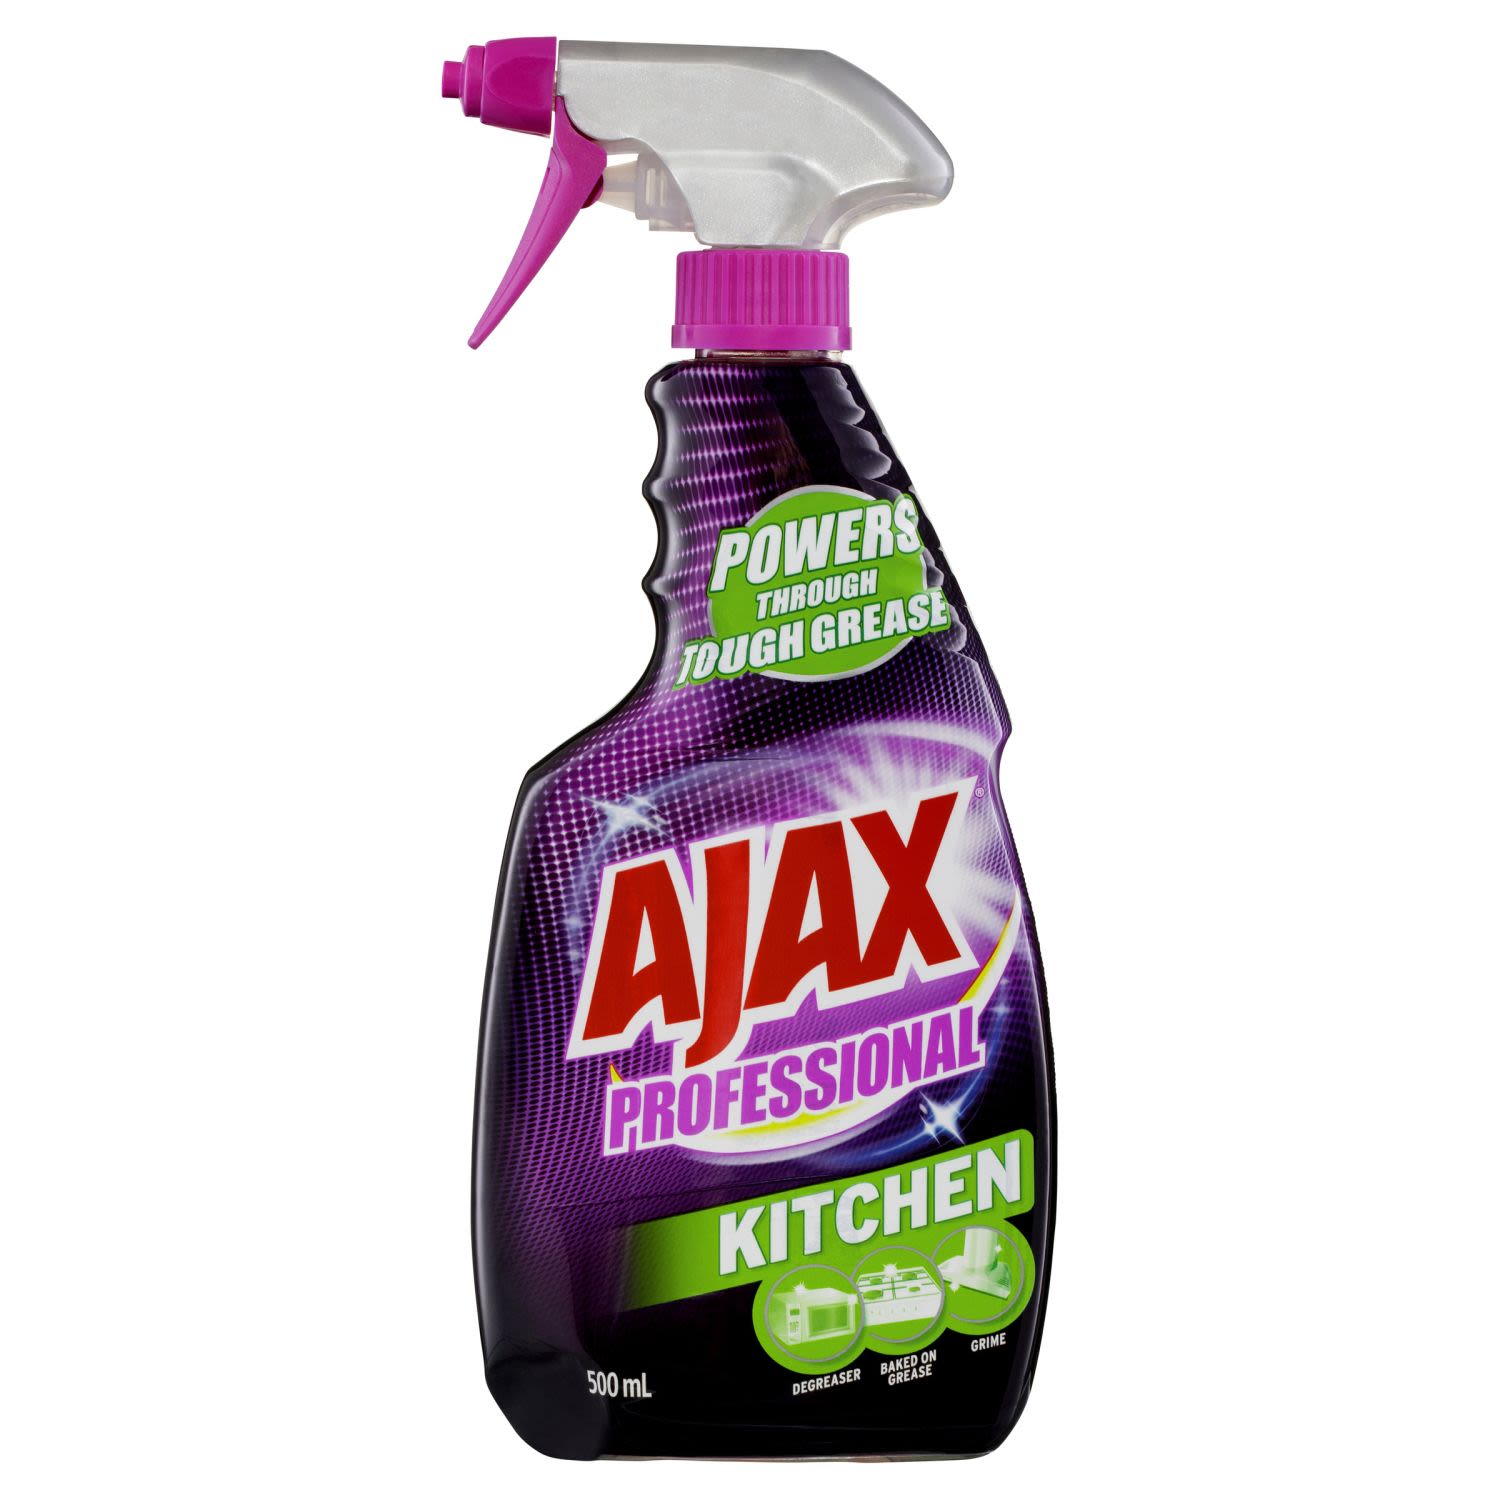 Ajax Professional Kitchen Power Degreaser Household Cleaner Trigger Spray, 500 Millilitre